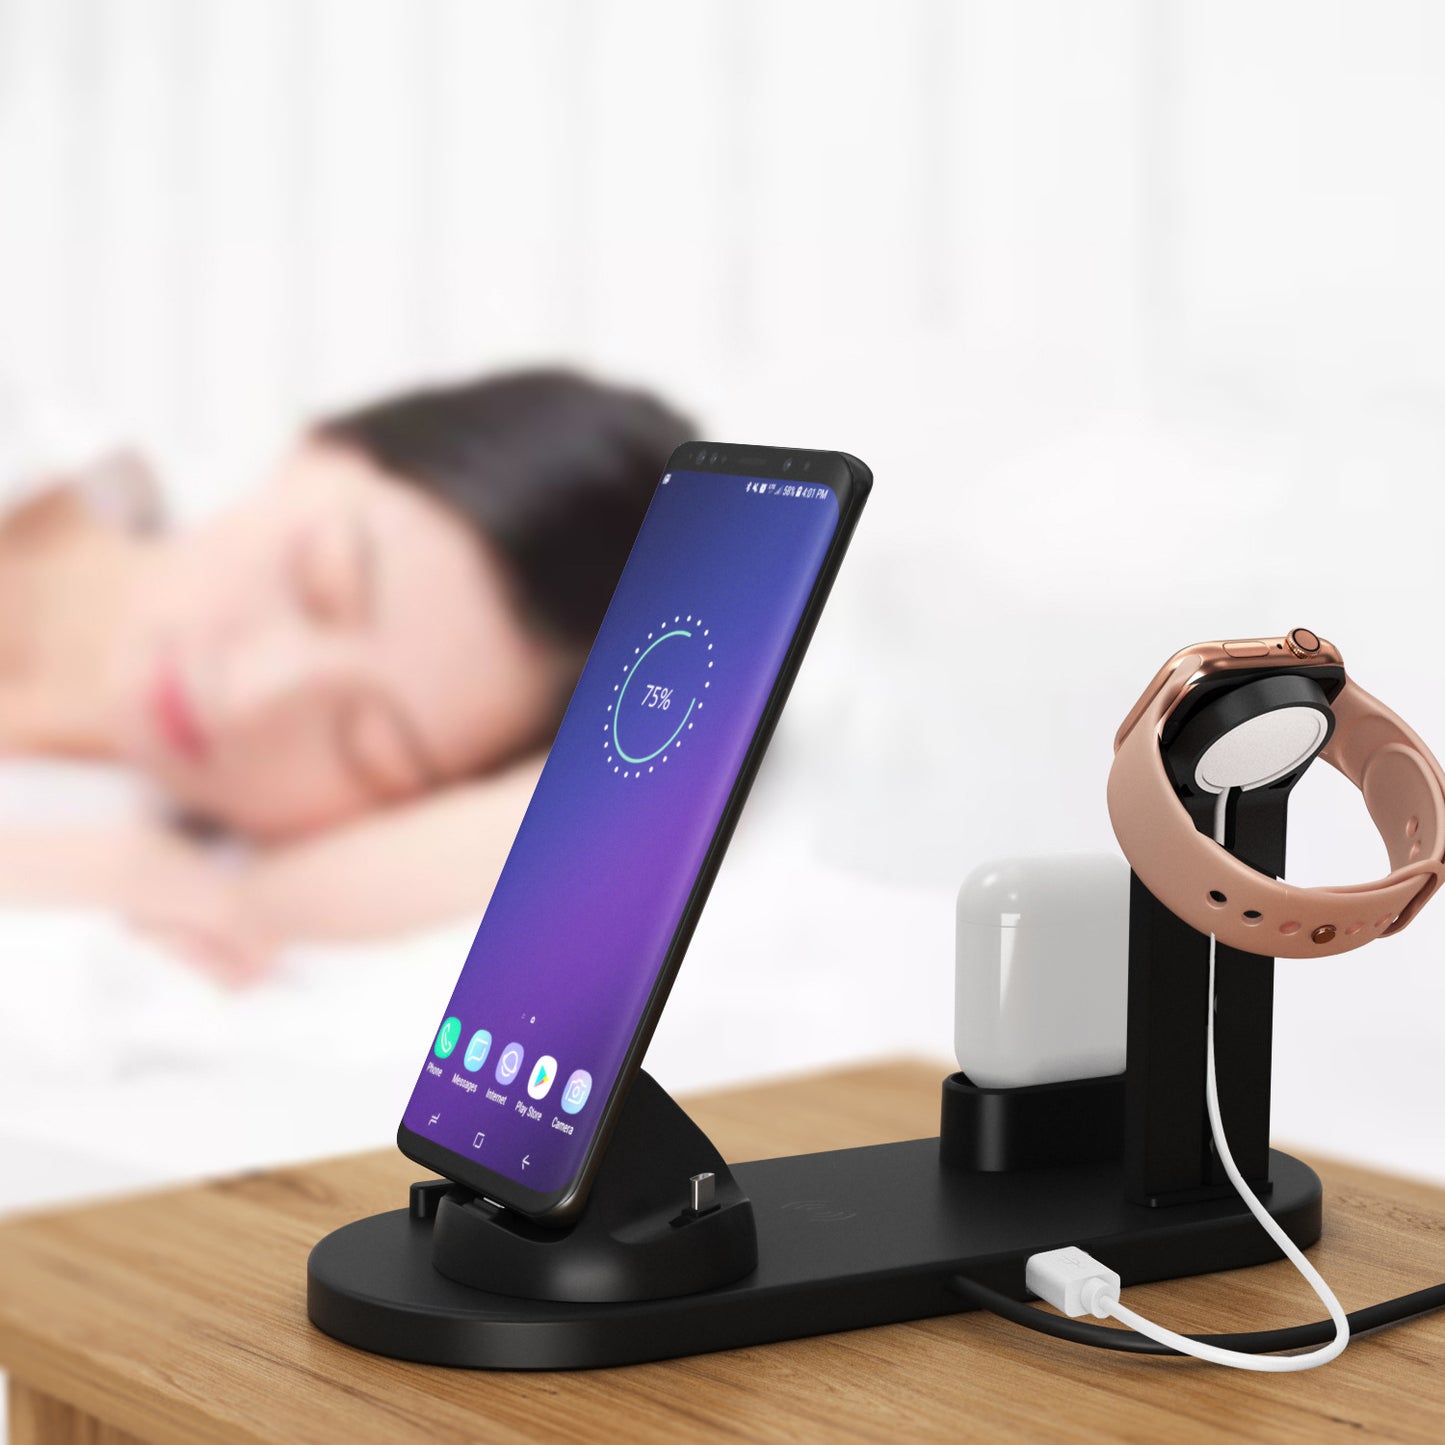 Second generation mobile phone watch Bluetooth headset four in one wireless charging base bracket explosion models wireless charging fast charging bracket